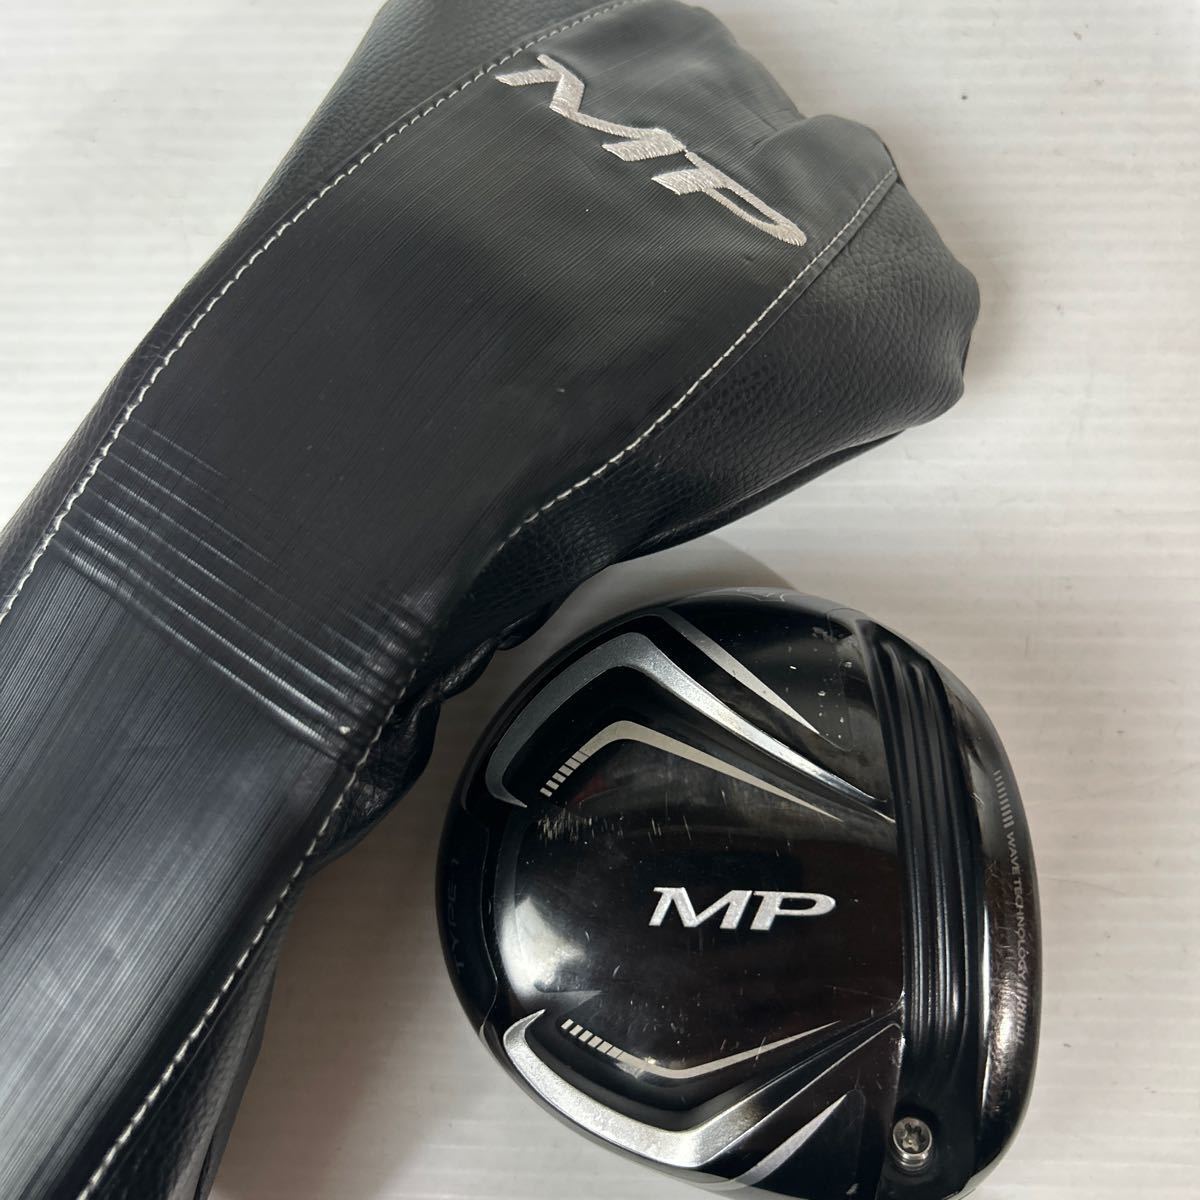 Mizuno Mp Type-1 Driver Head Cover Included Pro Management Number 13676